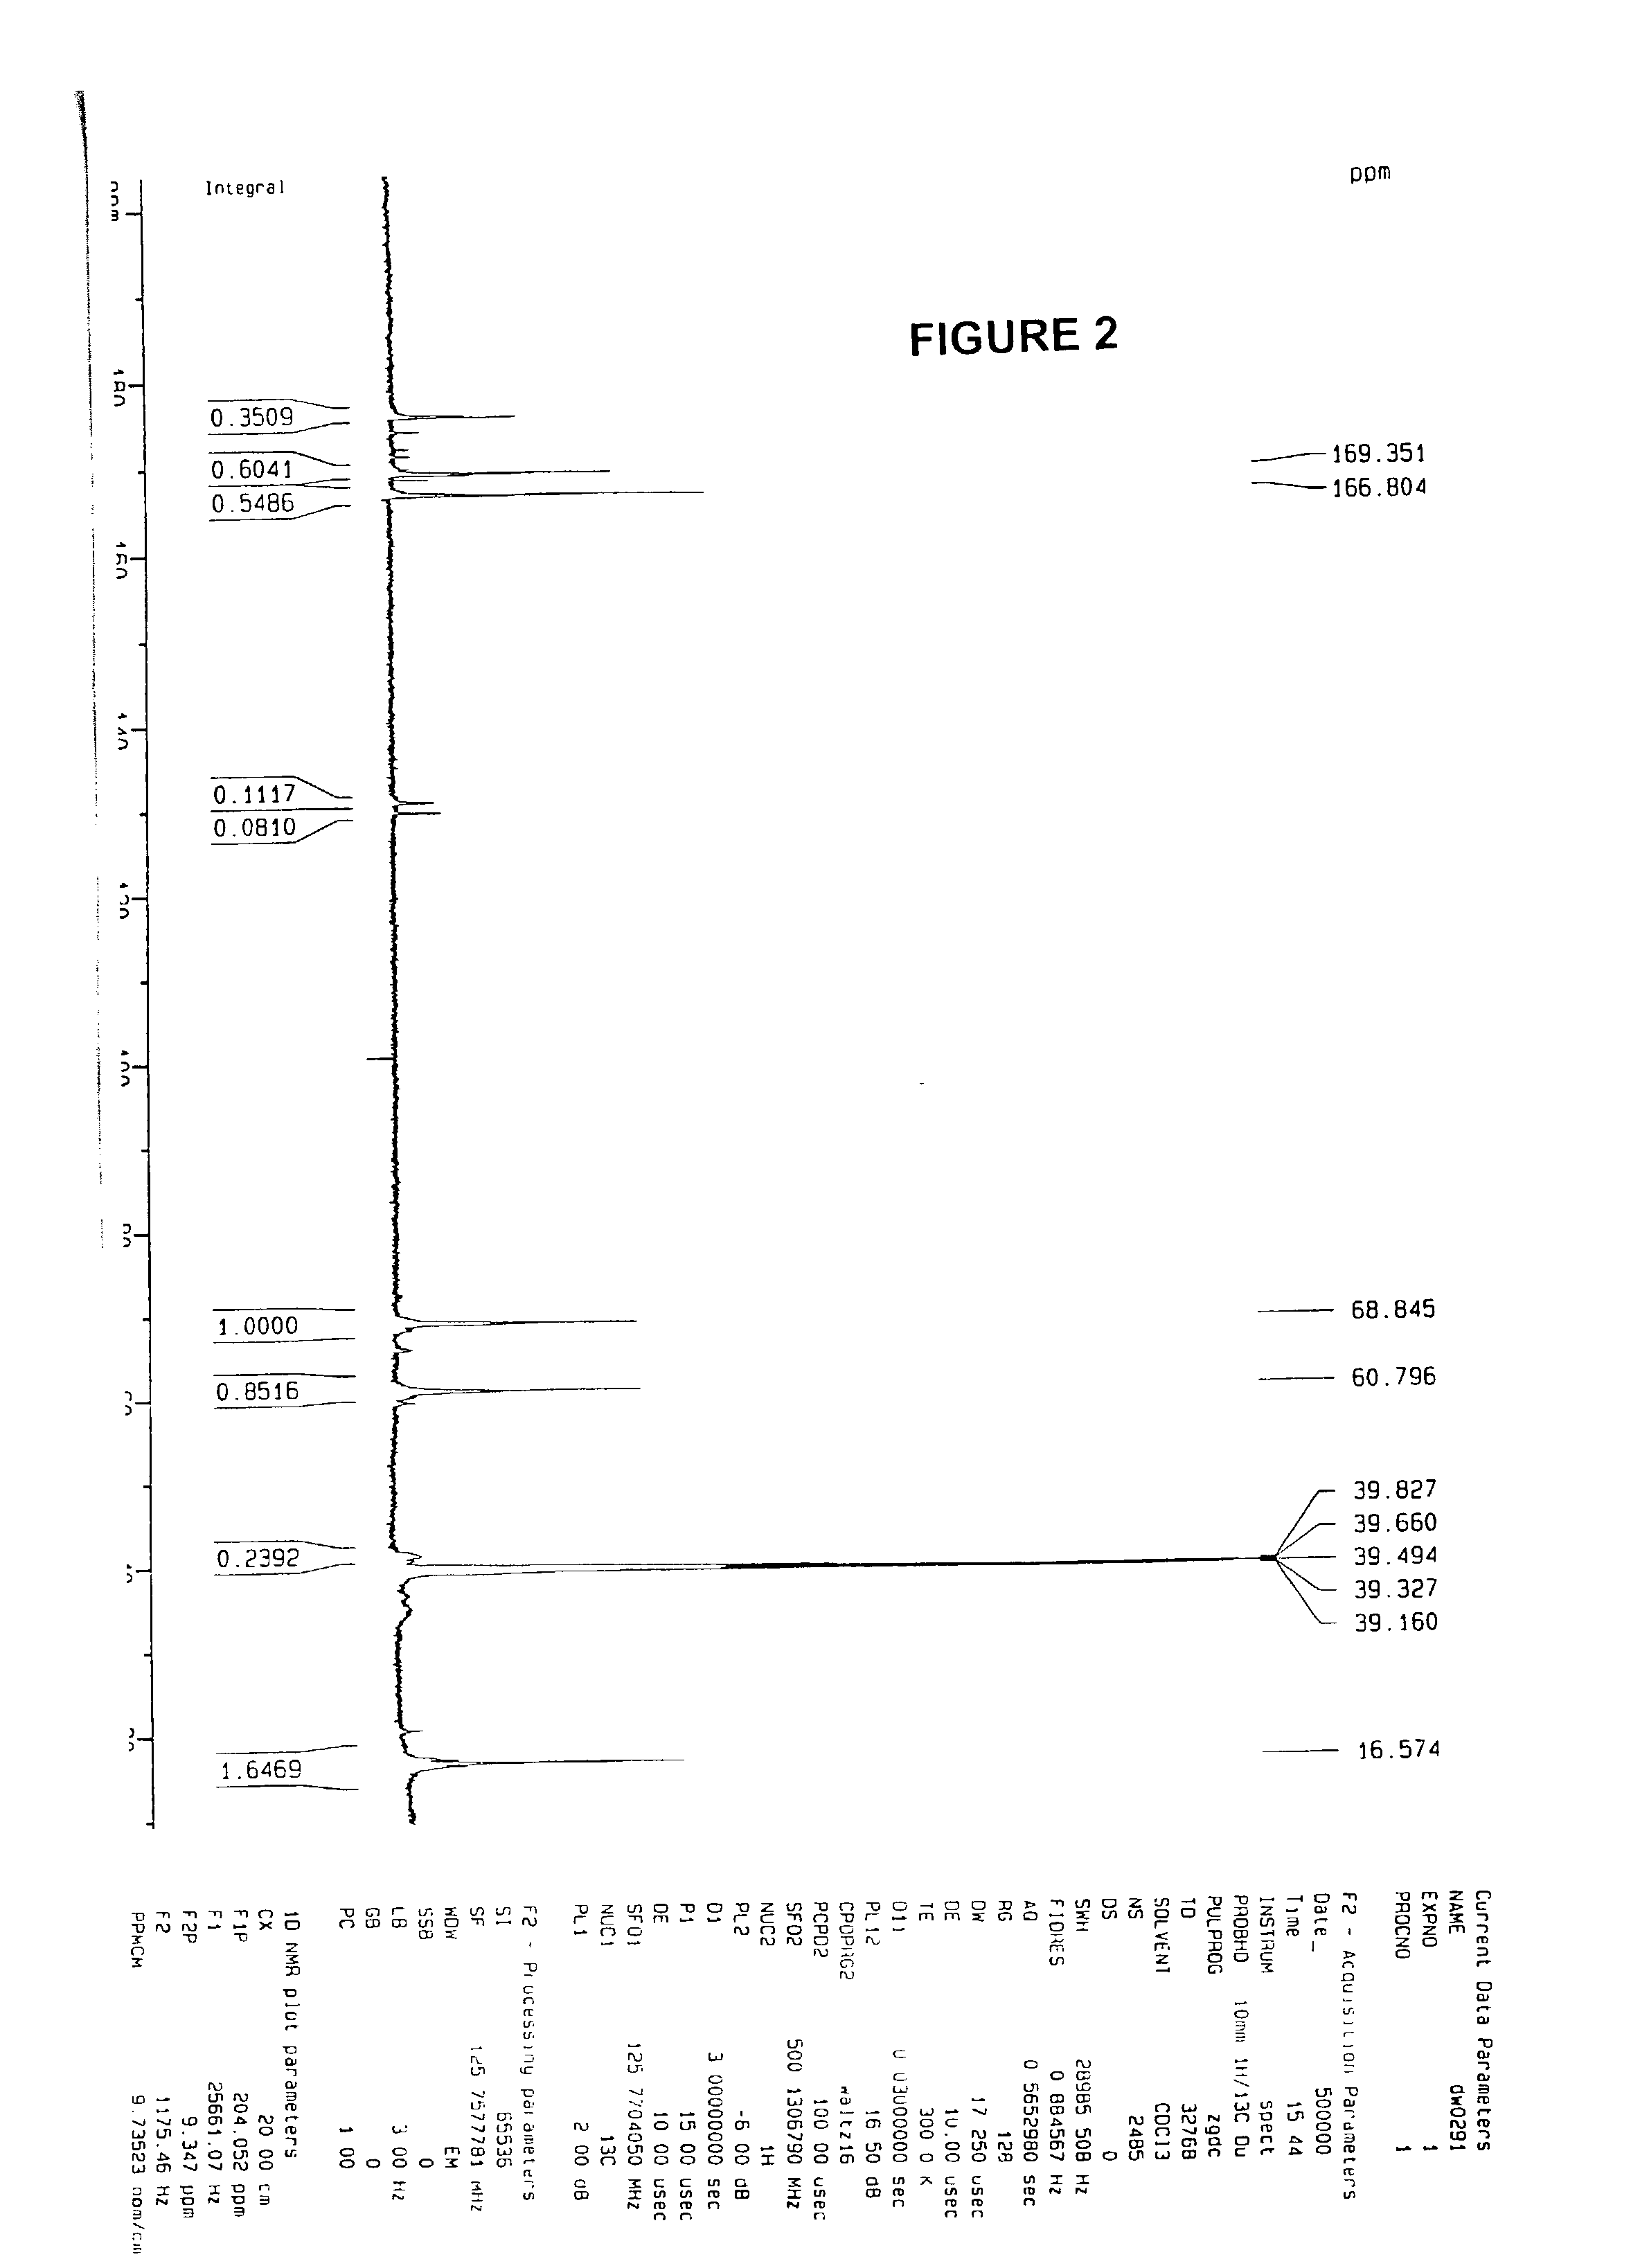 Methods of making functional biodegradable polymers